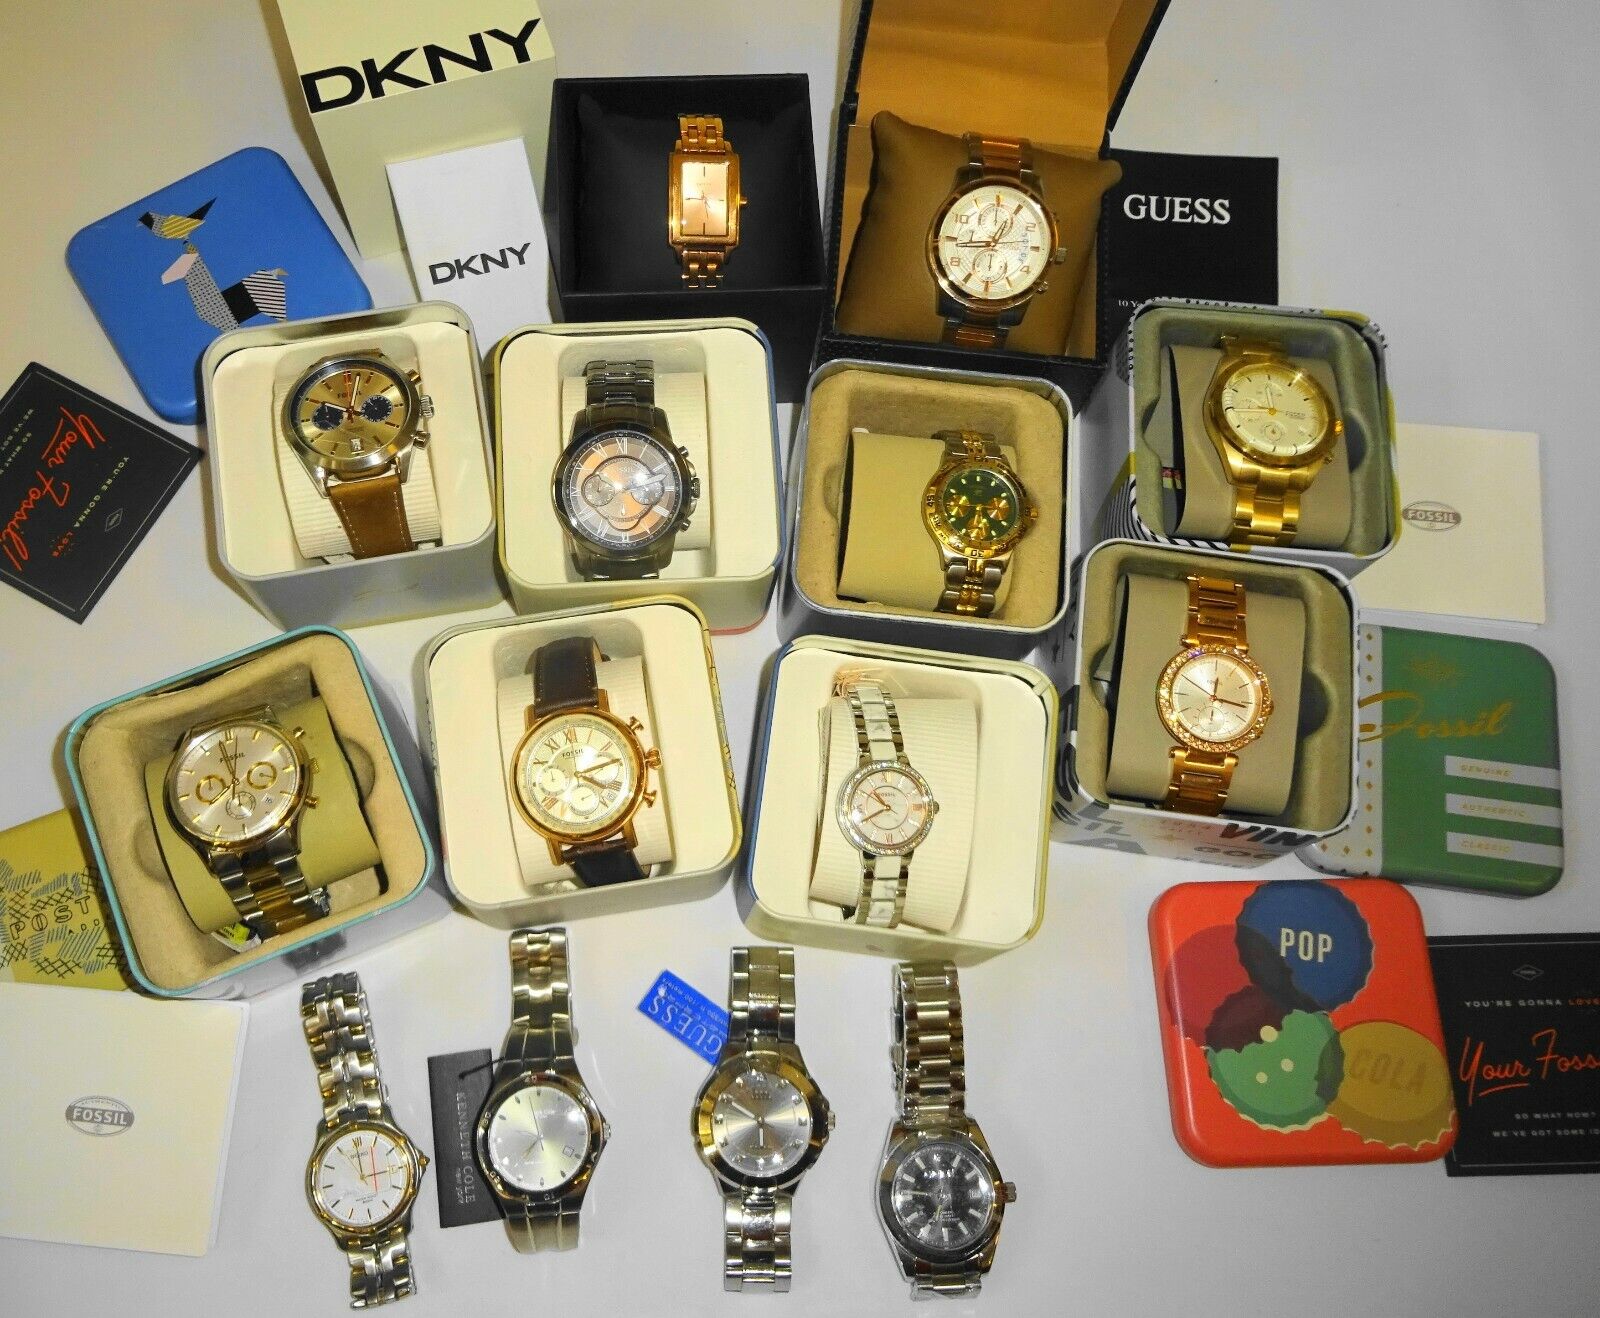  WHOLESALES LOT WATCHES STAINLESS STEEL GOLD SILVER MULTI 14 Watches Fossil/guess/DKNY